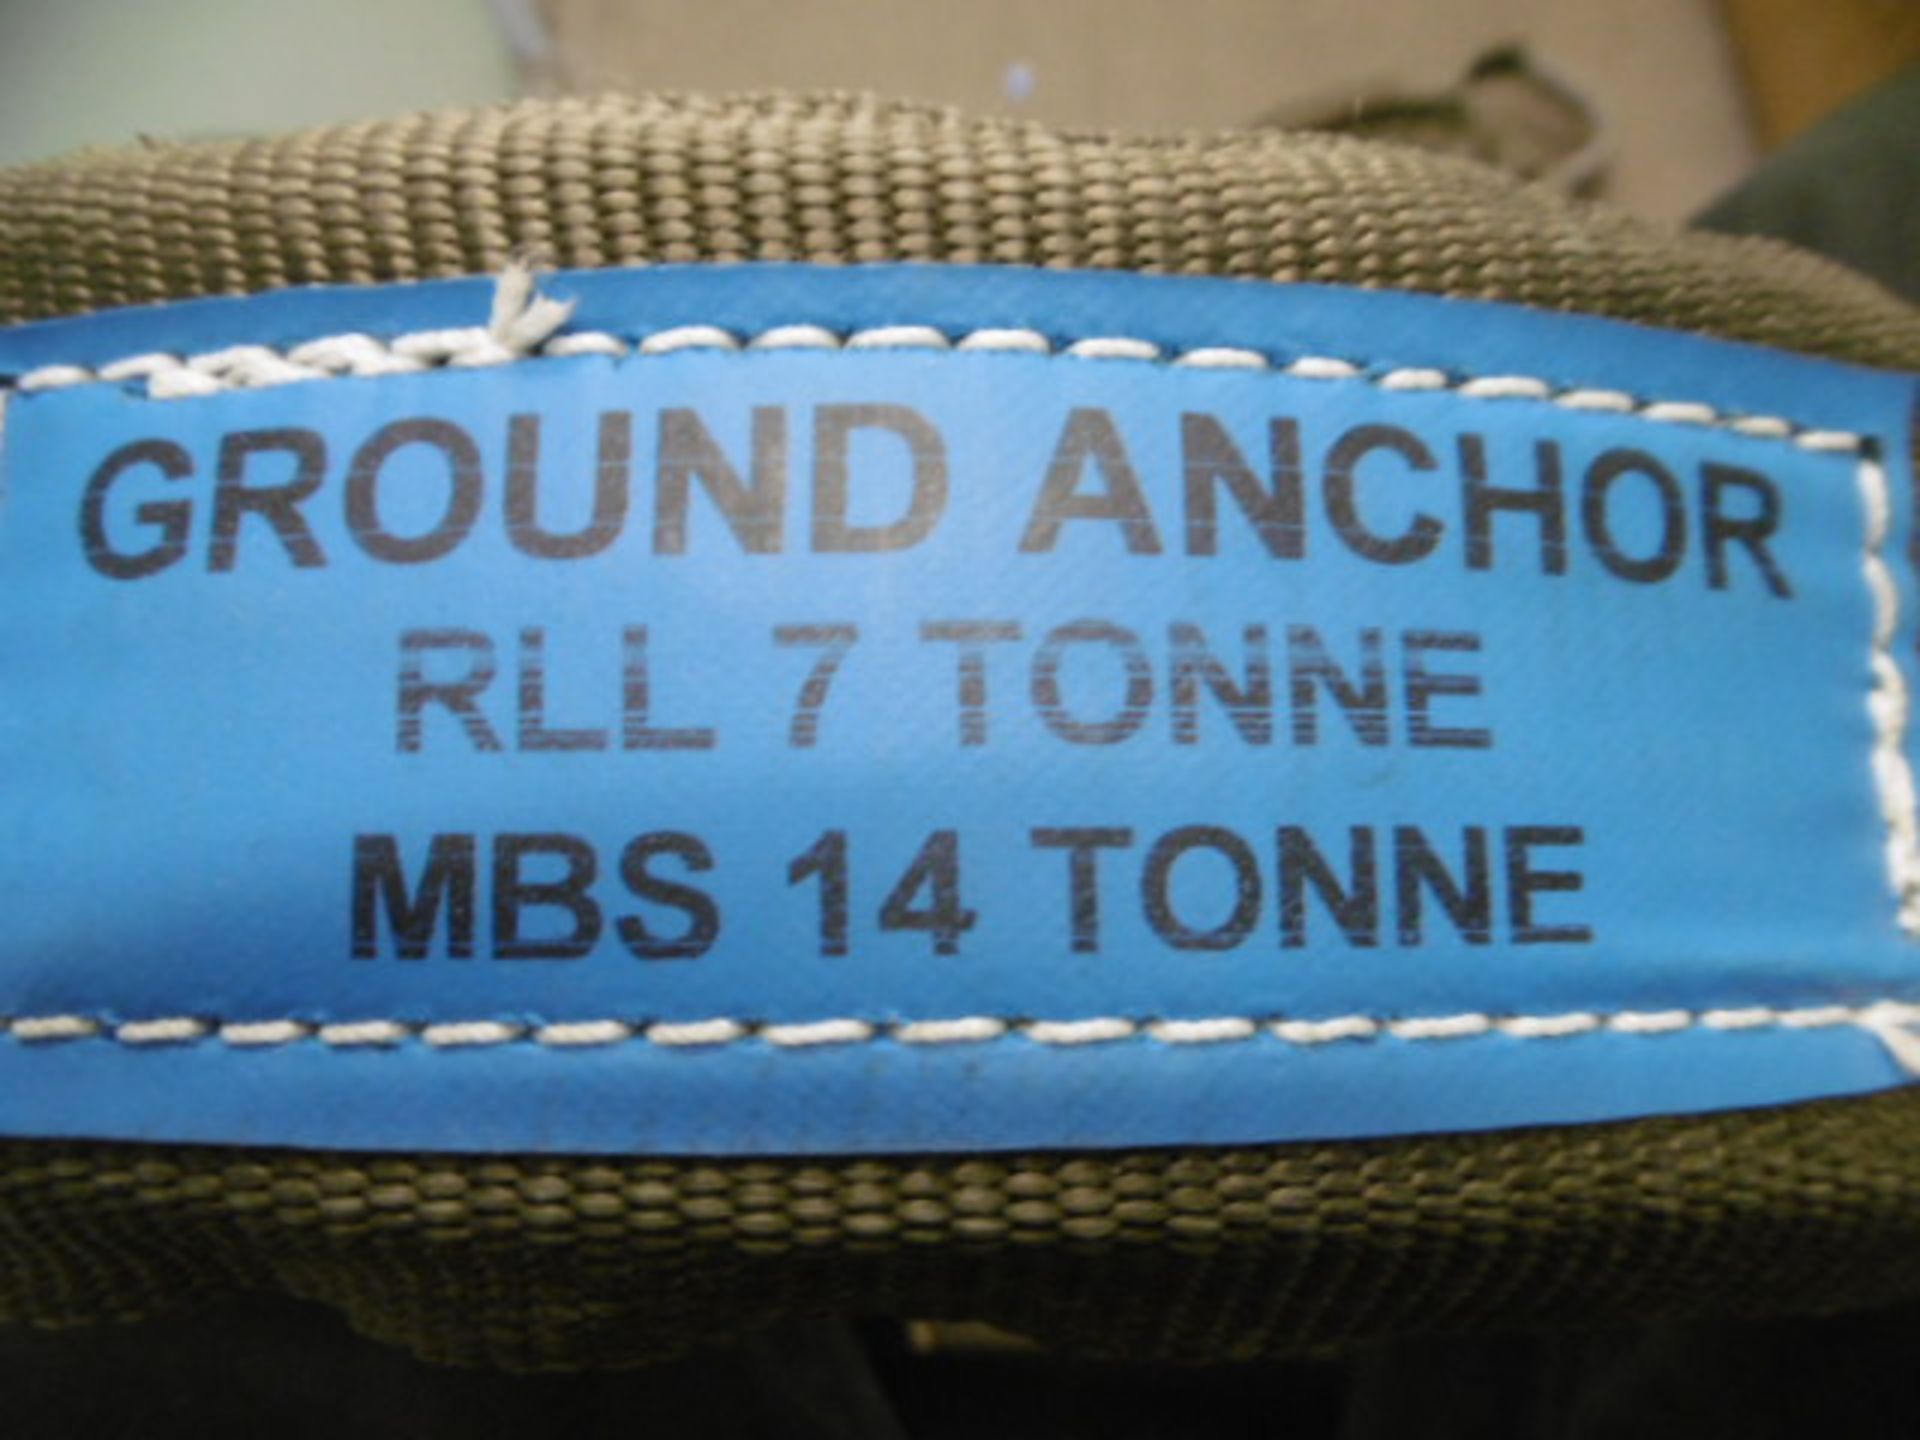 4 x 7 Tonne Ground Anchor Straps - Image 4 of 6